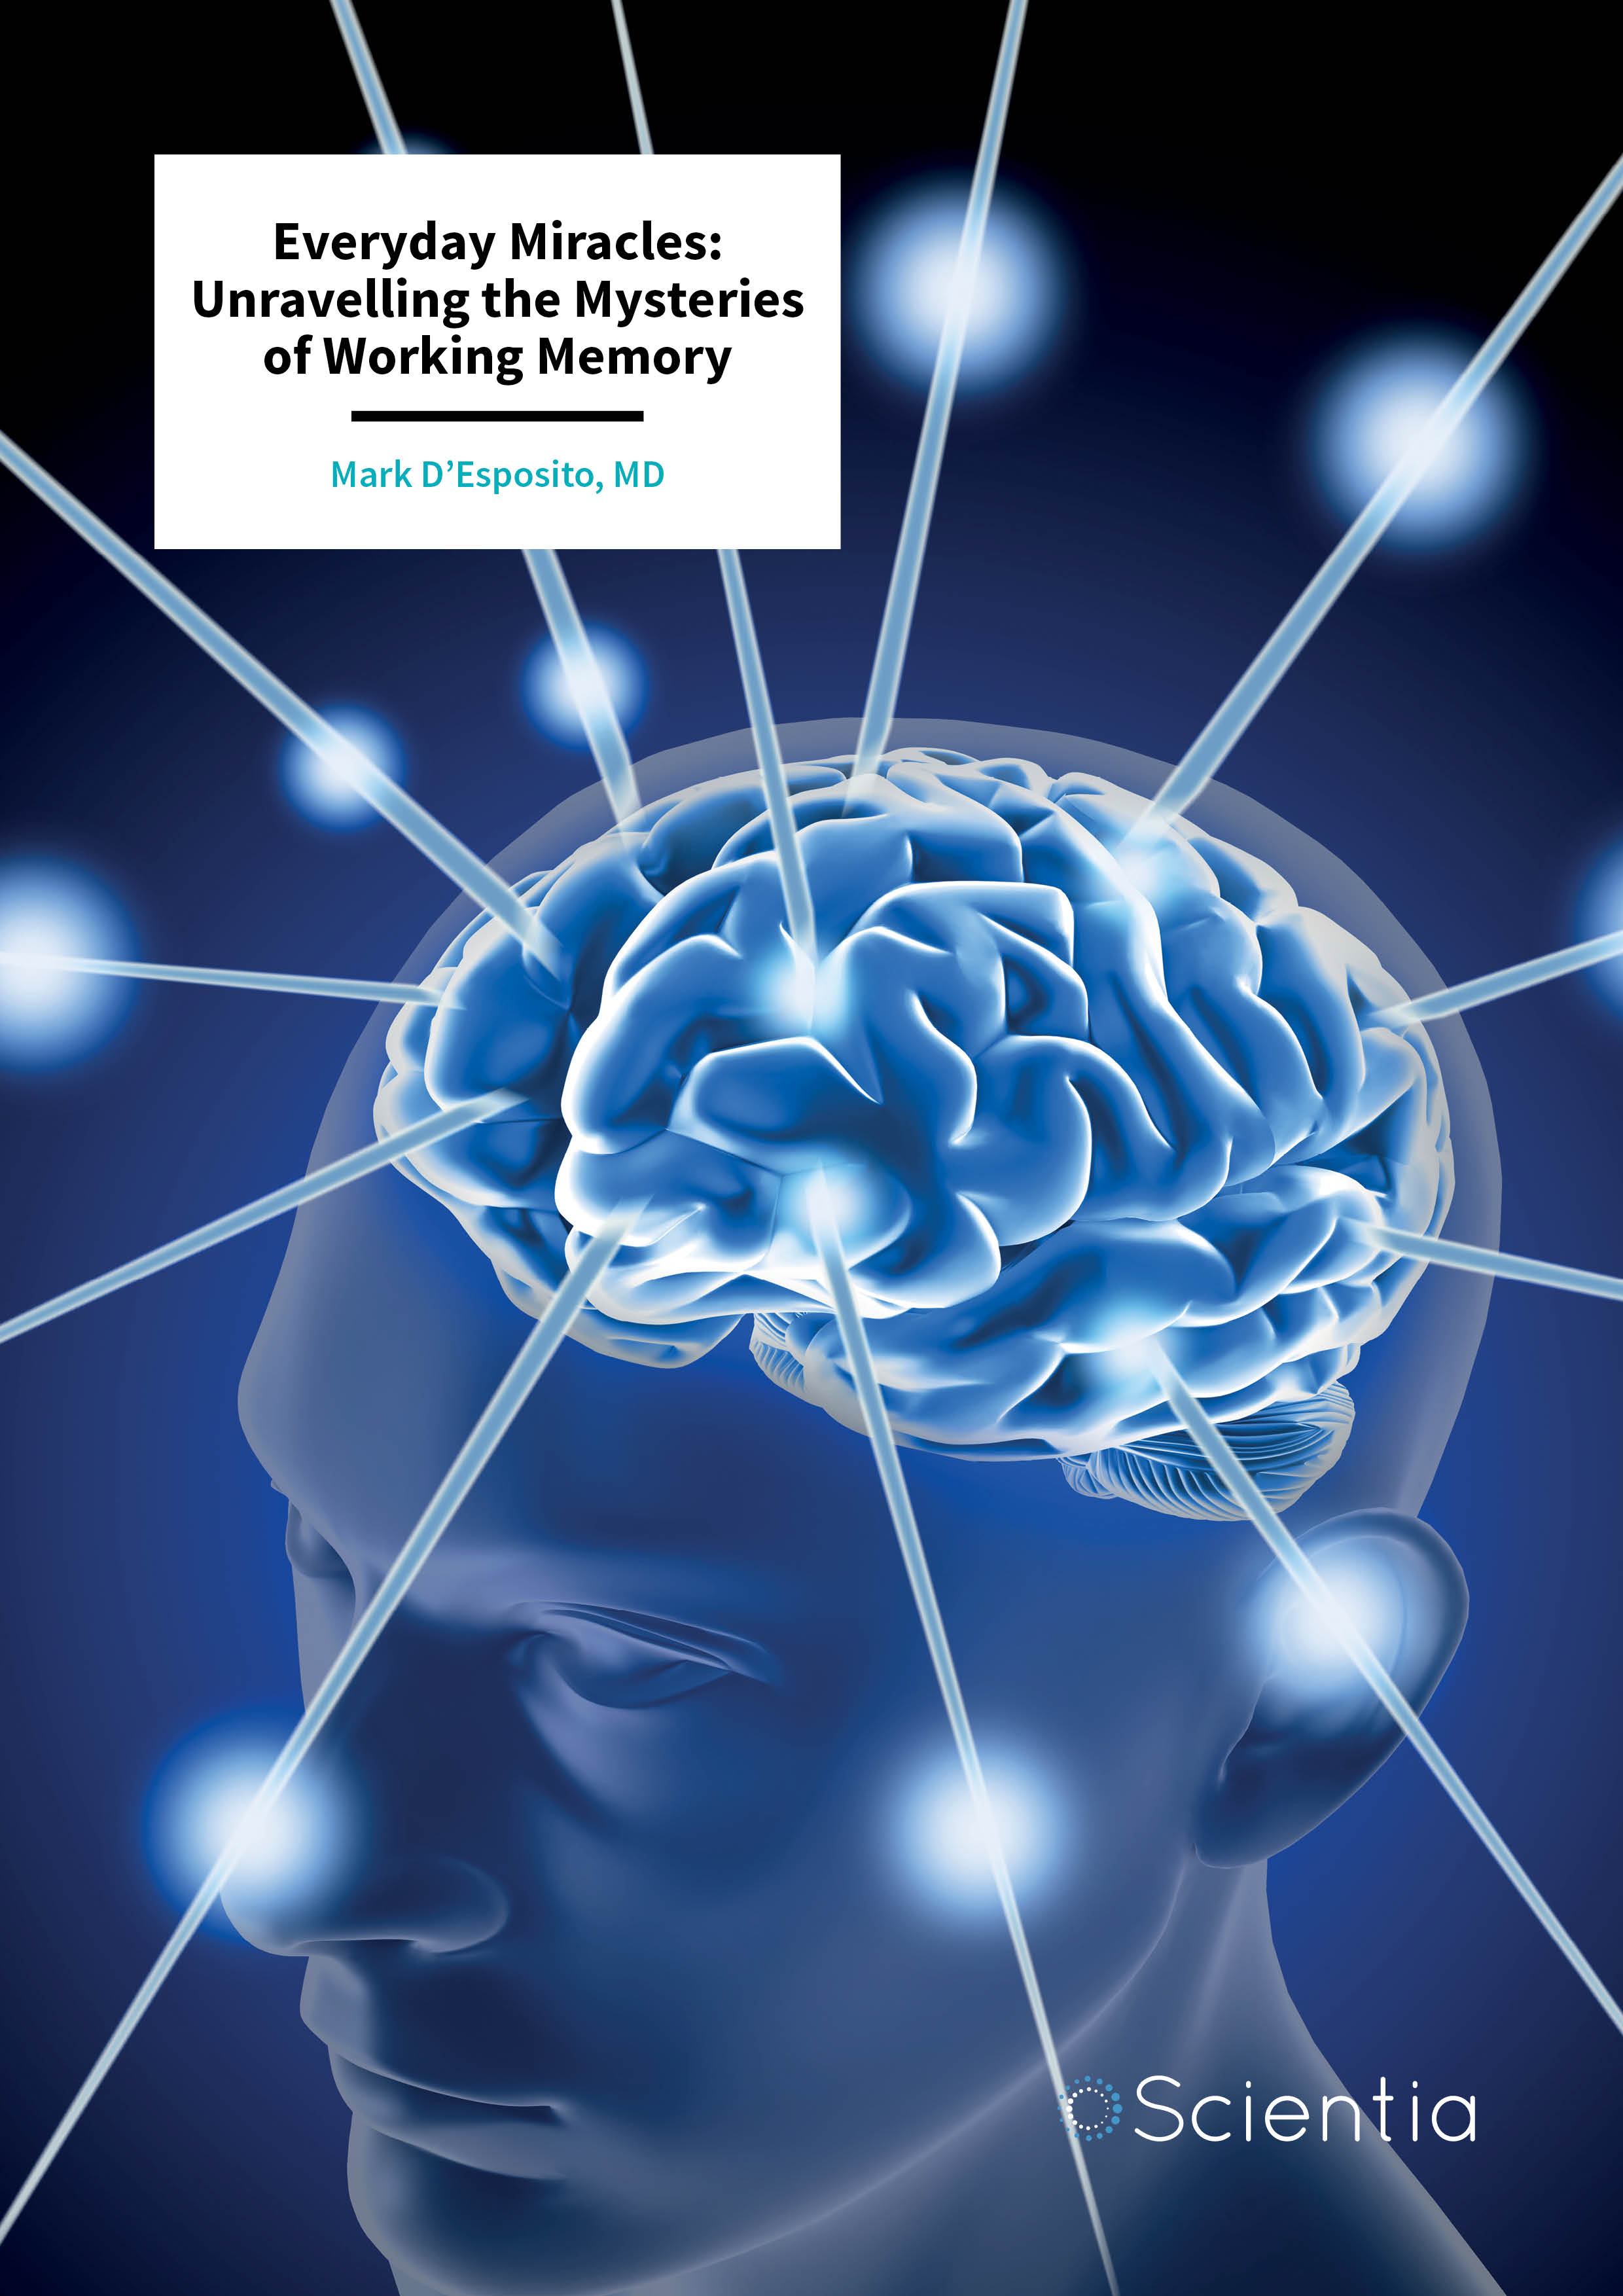 Professor Mark D’Esposito – Everyday Miracles: Unravelling the Mysteries of Working Memory